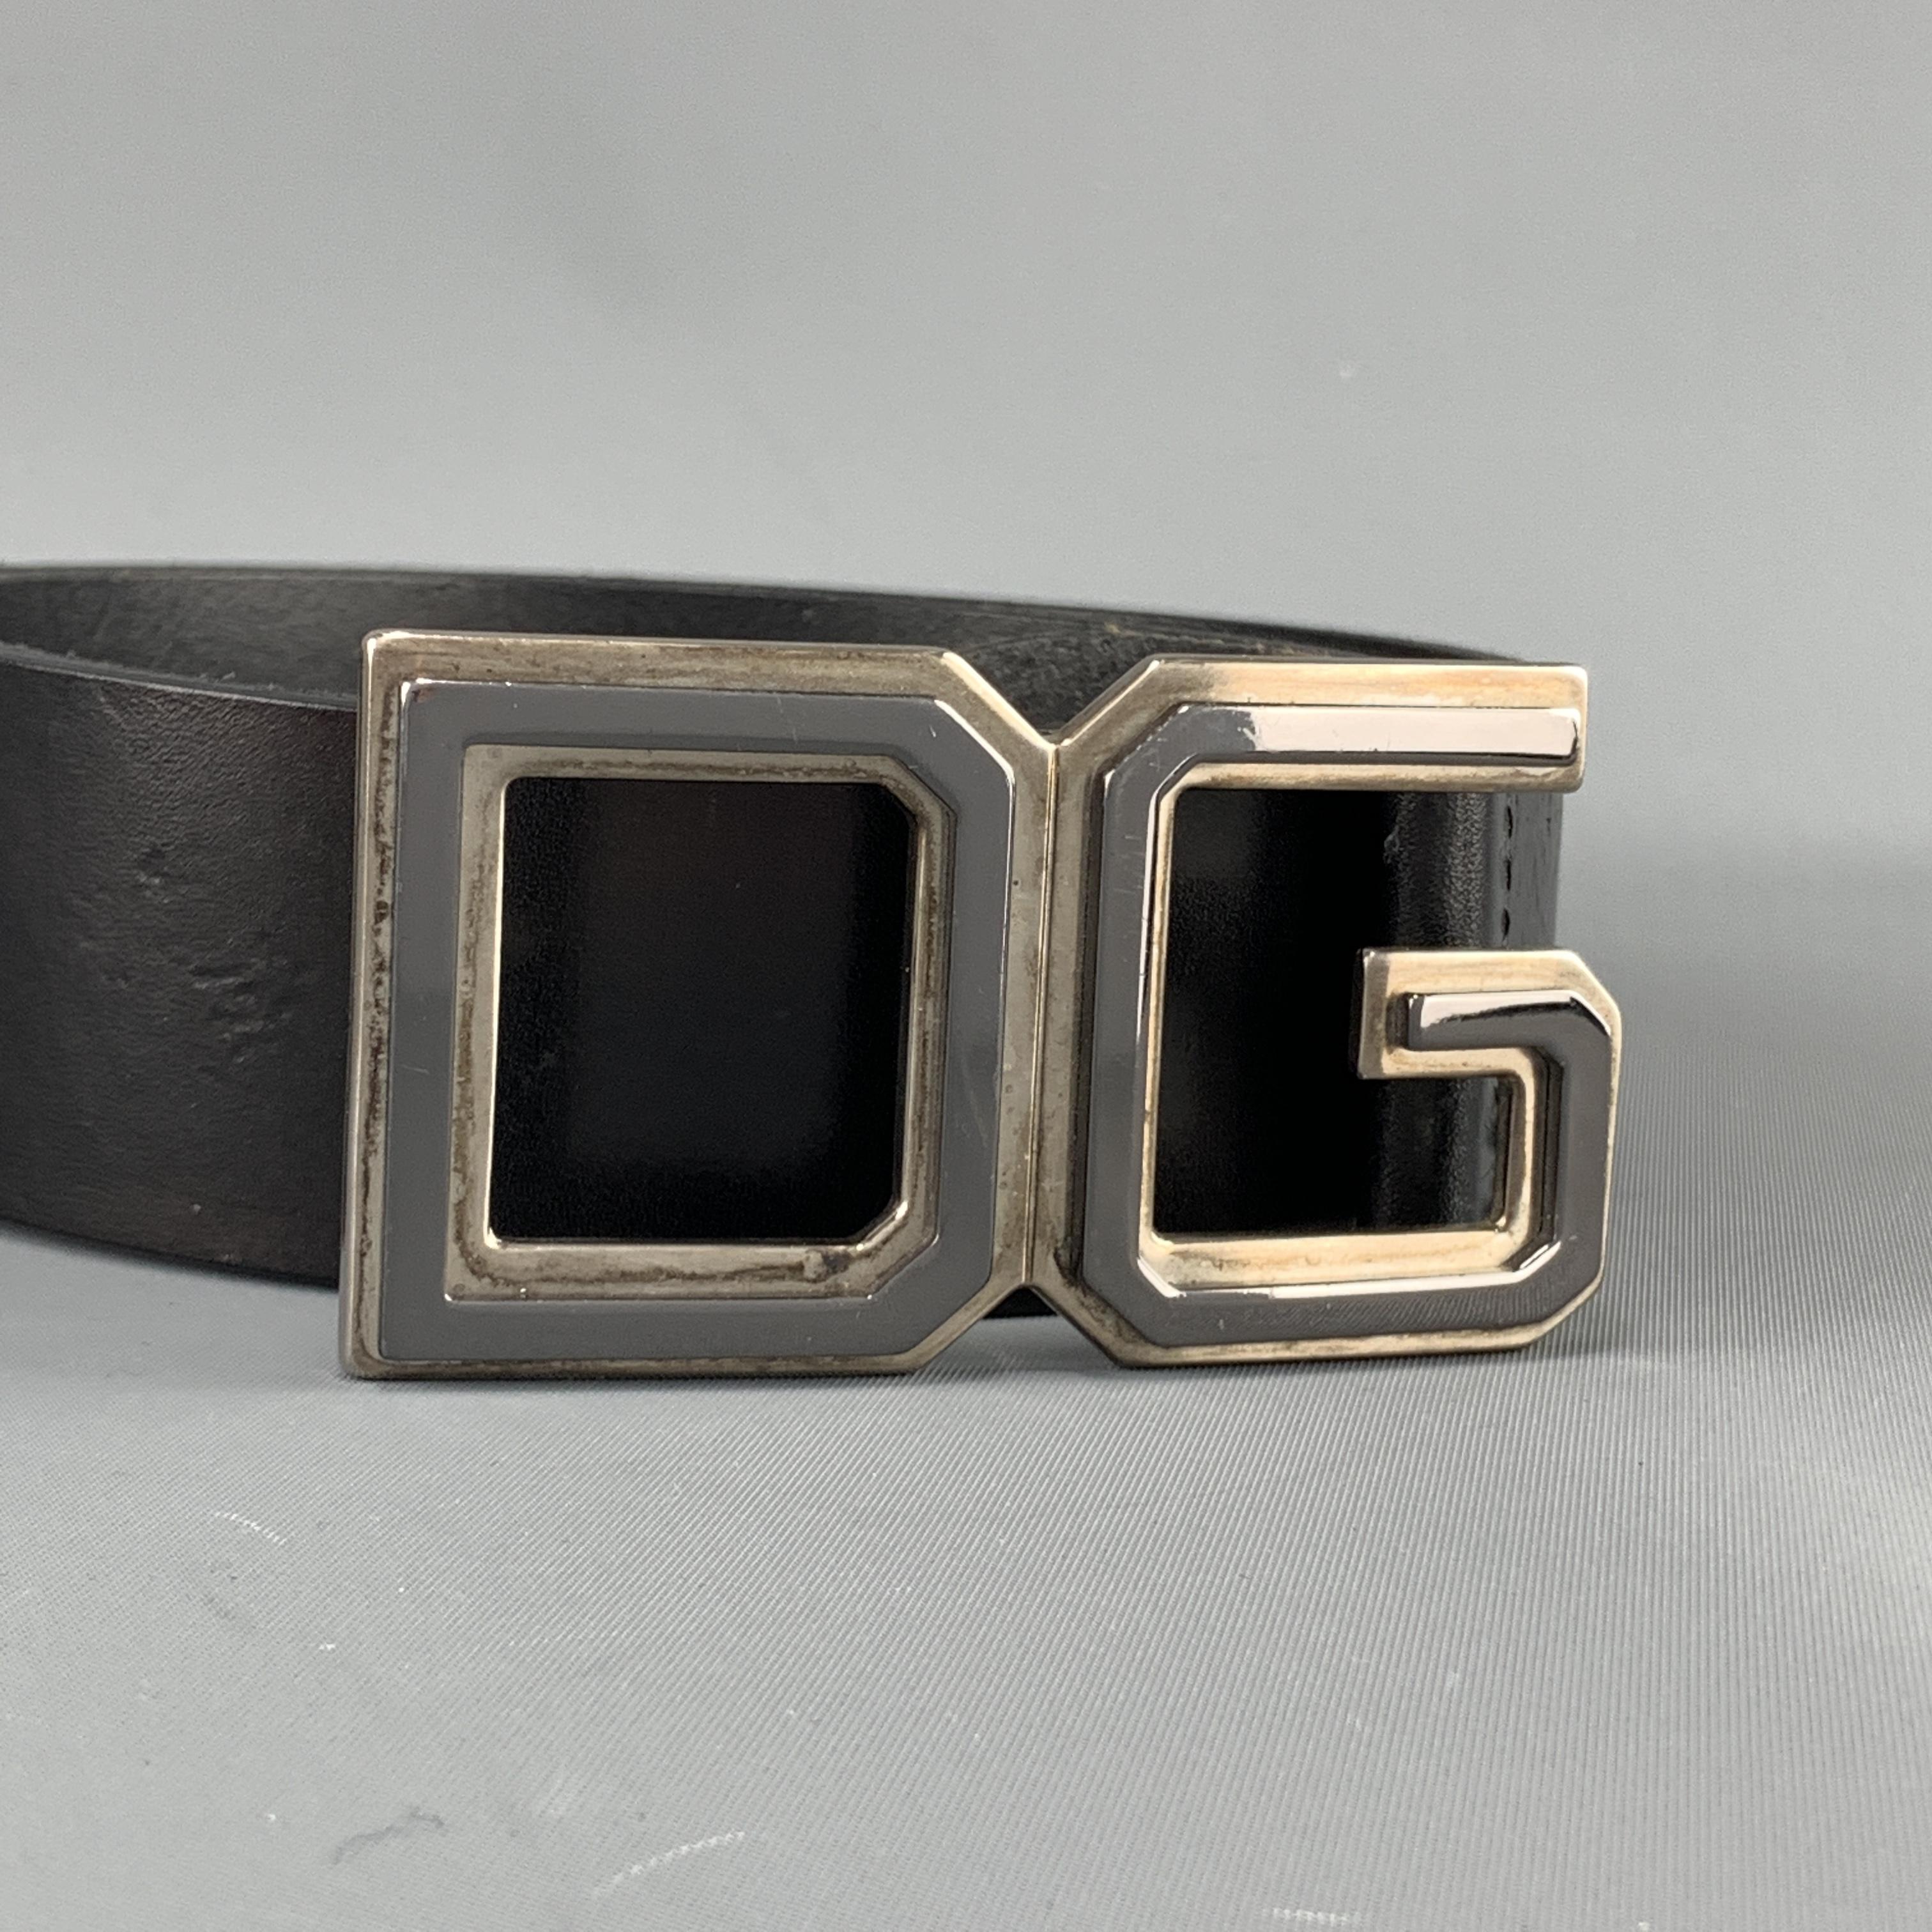 DOLCE & GABBANA belt features a black leather strap with a dark silver tone sporty font DG buckle. Minor wear. As-is. Made in Italy.

Good Pre-Owned Condition.
Marked: 95 cm - 38 in.

Length: 43.75 in.
Width: 1.5
Fits: 35.5-.9.5 in.
Buckle: 8.5 x 5